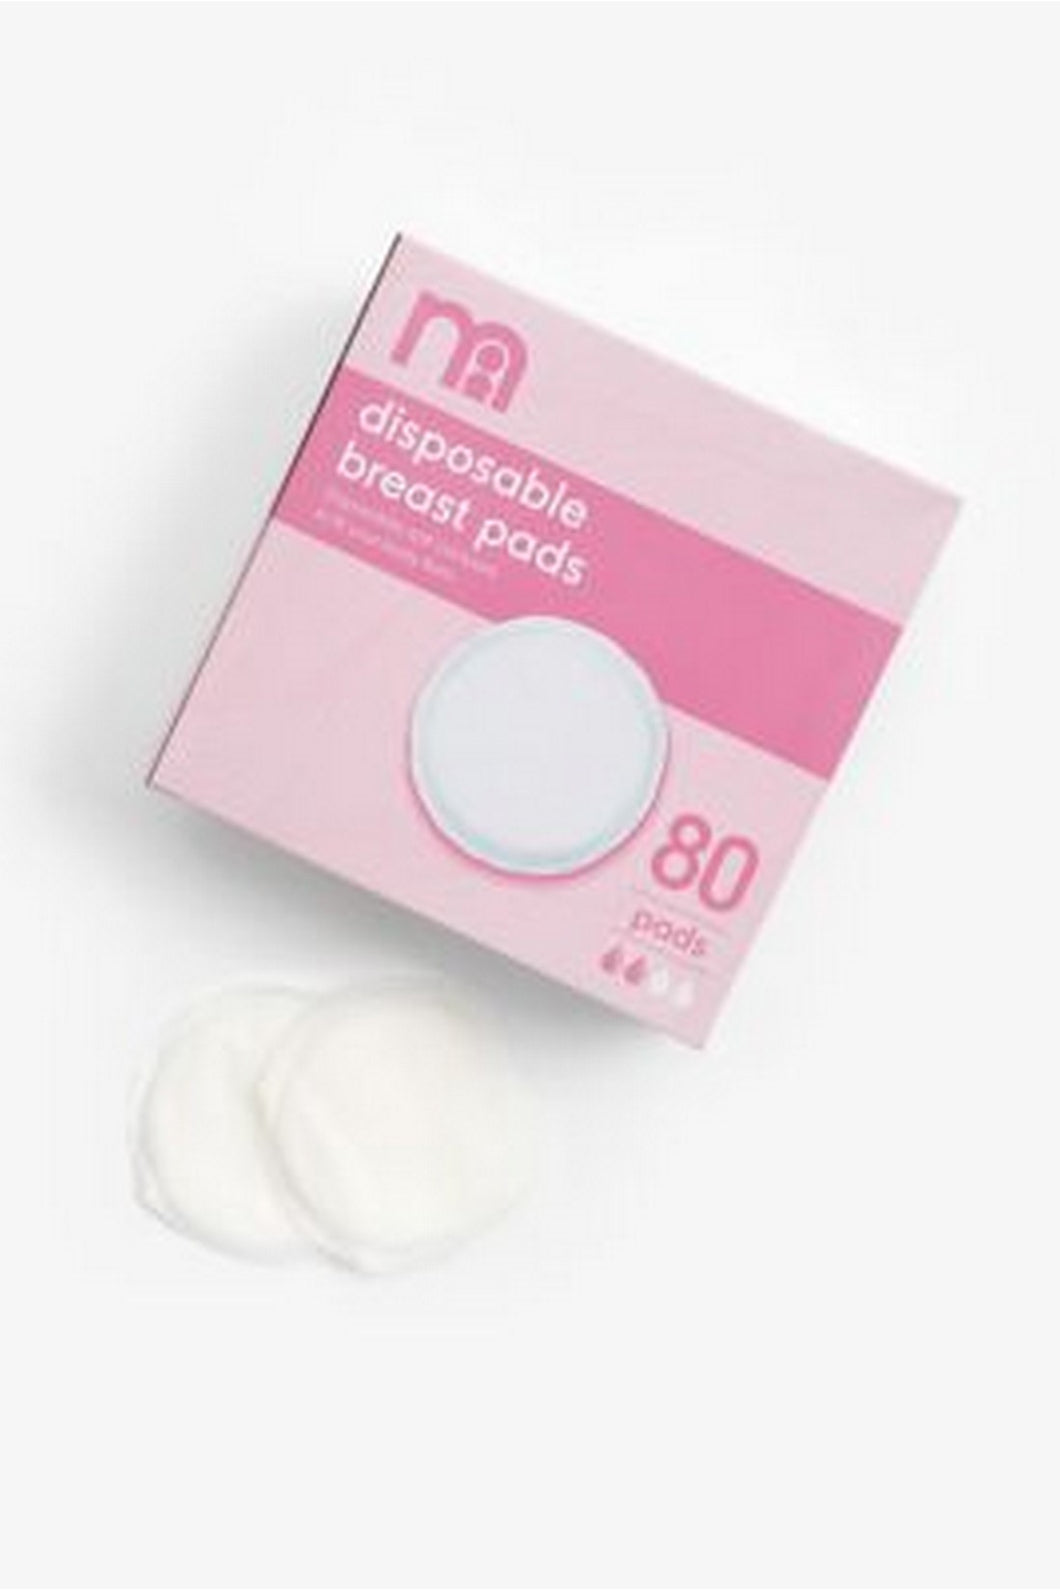 Mothercare Disposable Breast Pads 80 Pack 1